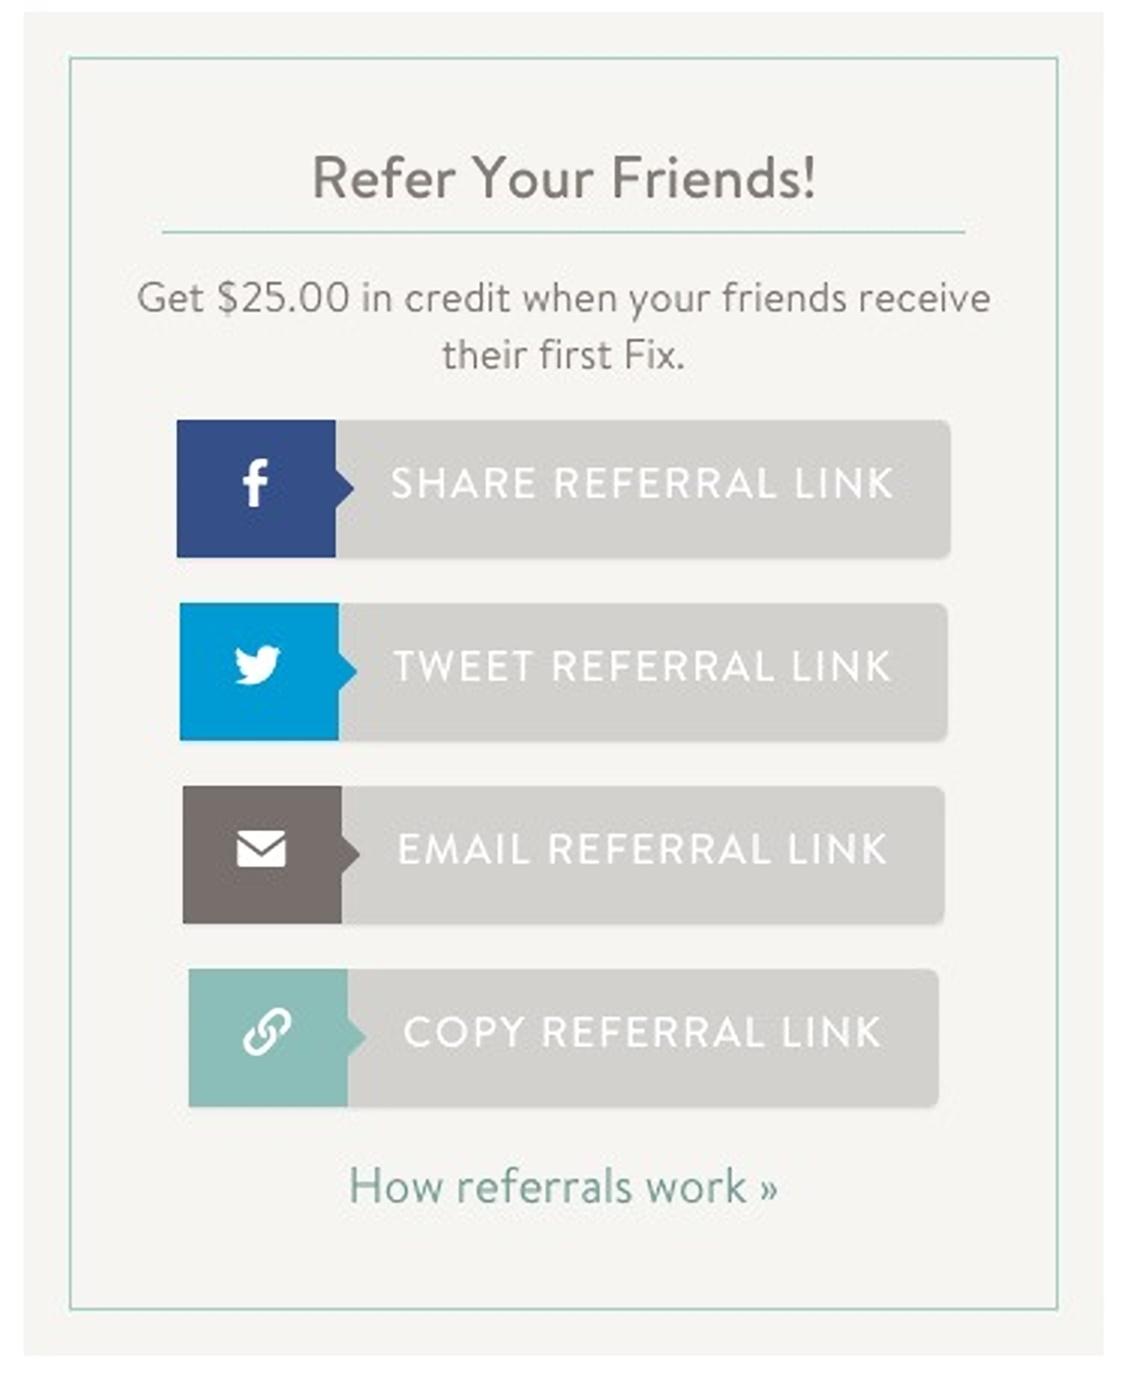 Popular clothing subscription service Stitch Fix does a great job of encouraging their current subscribers to refer their friends by providing them an easy social sharing option. 